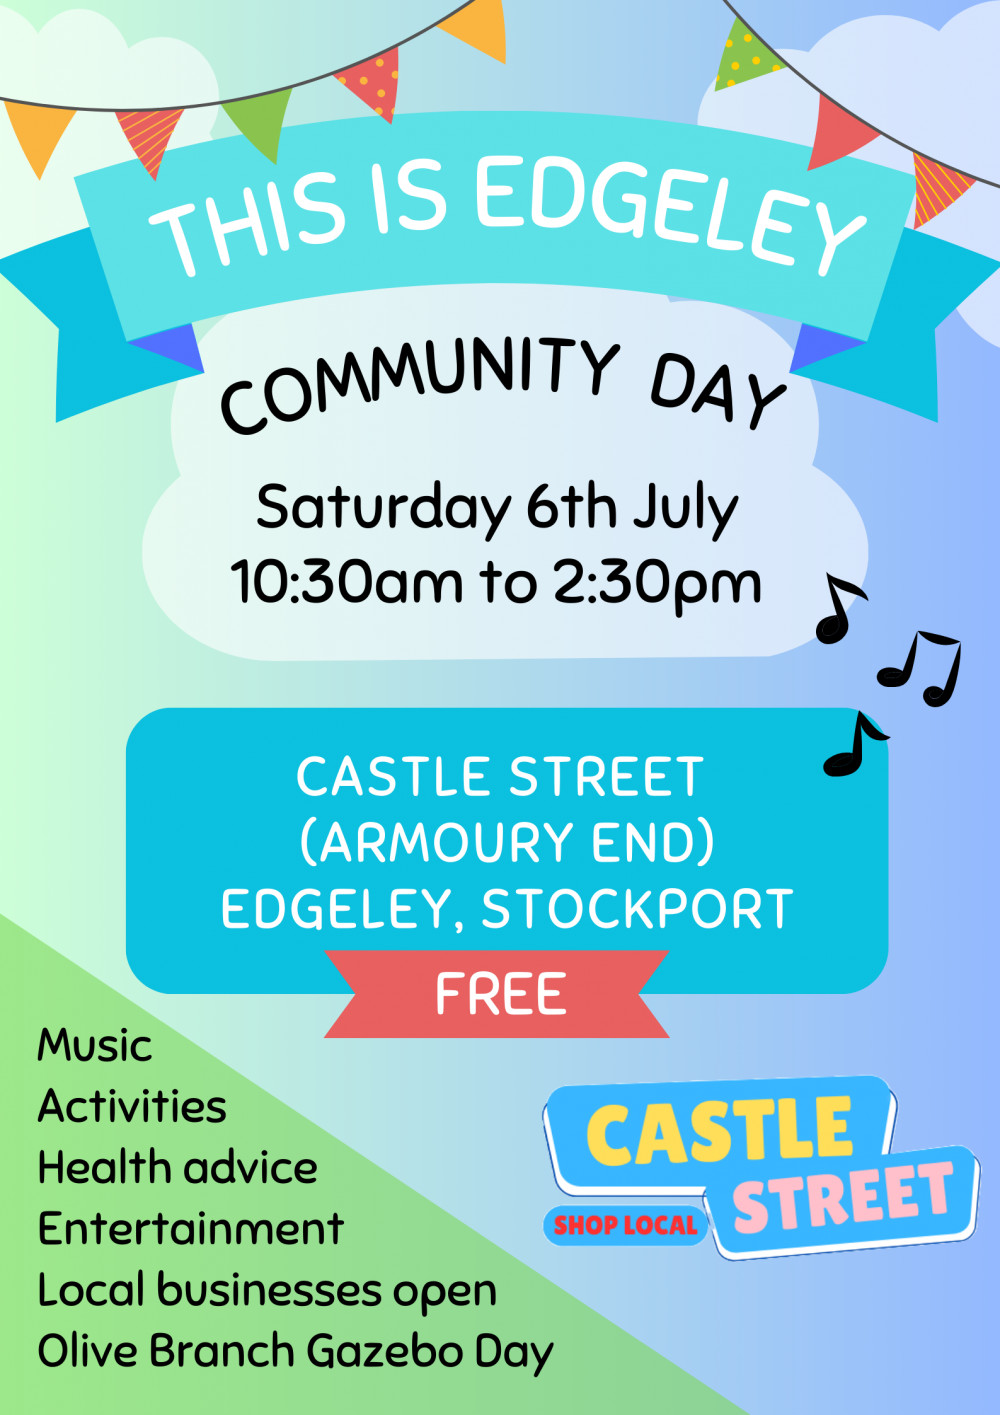 This is Edgeley - Community Day 